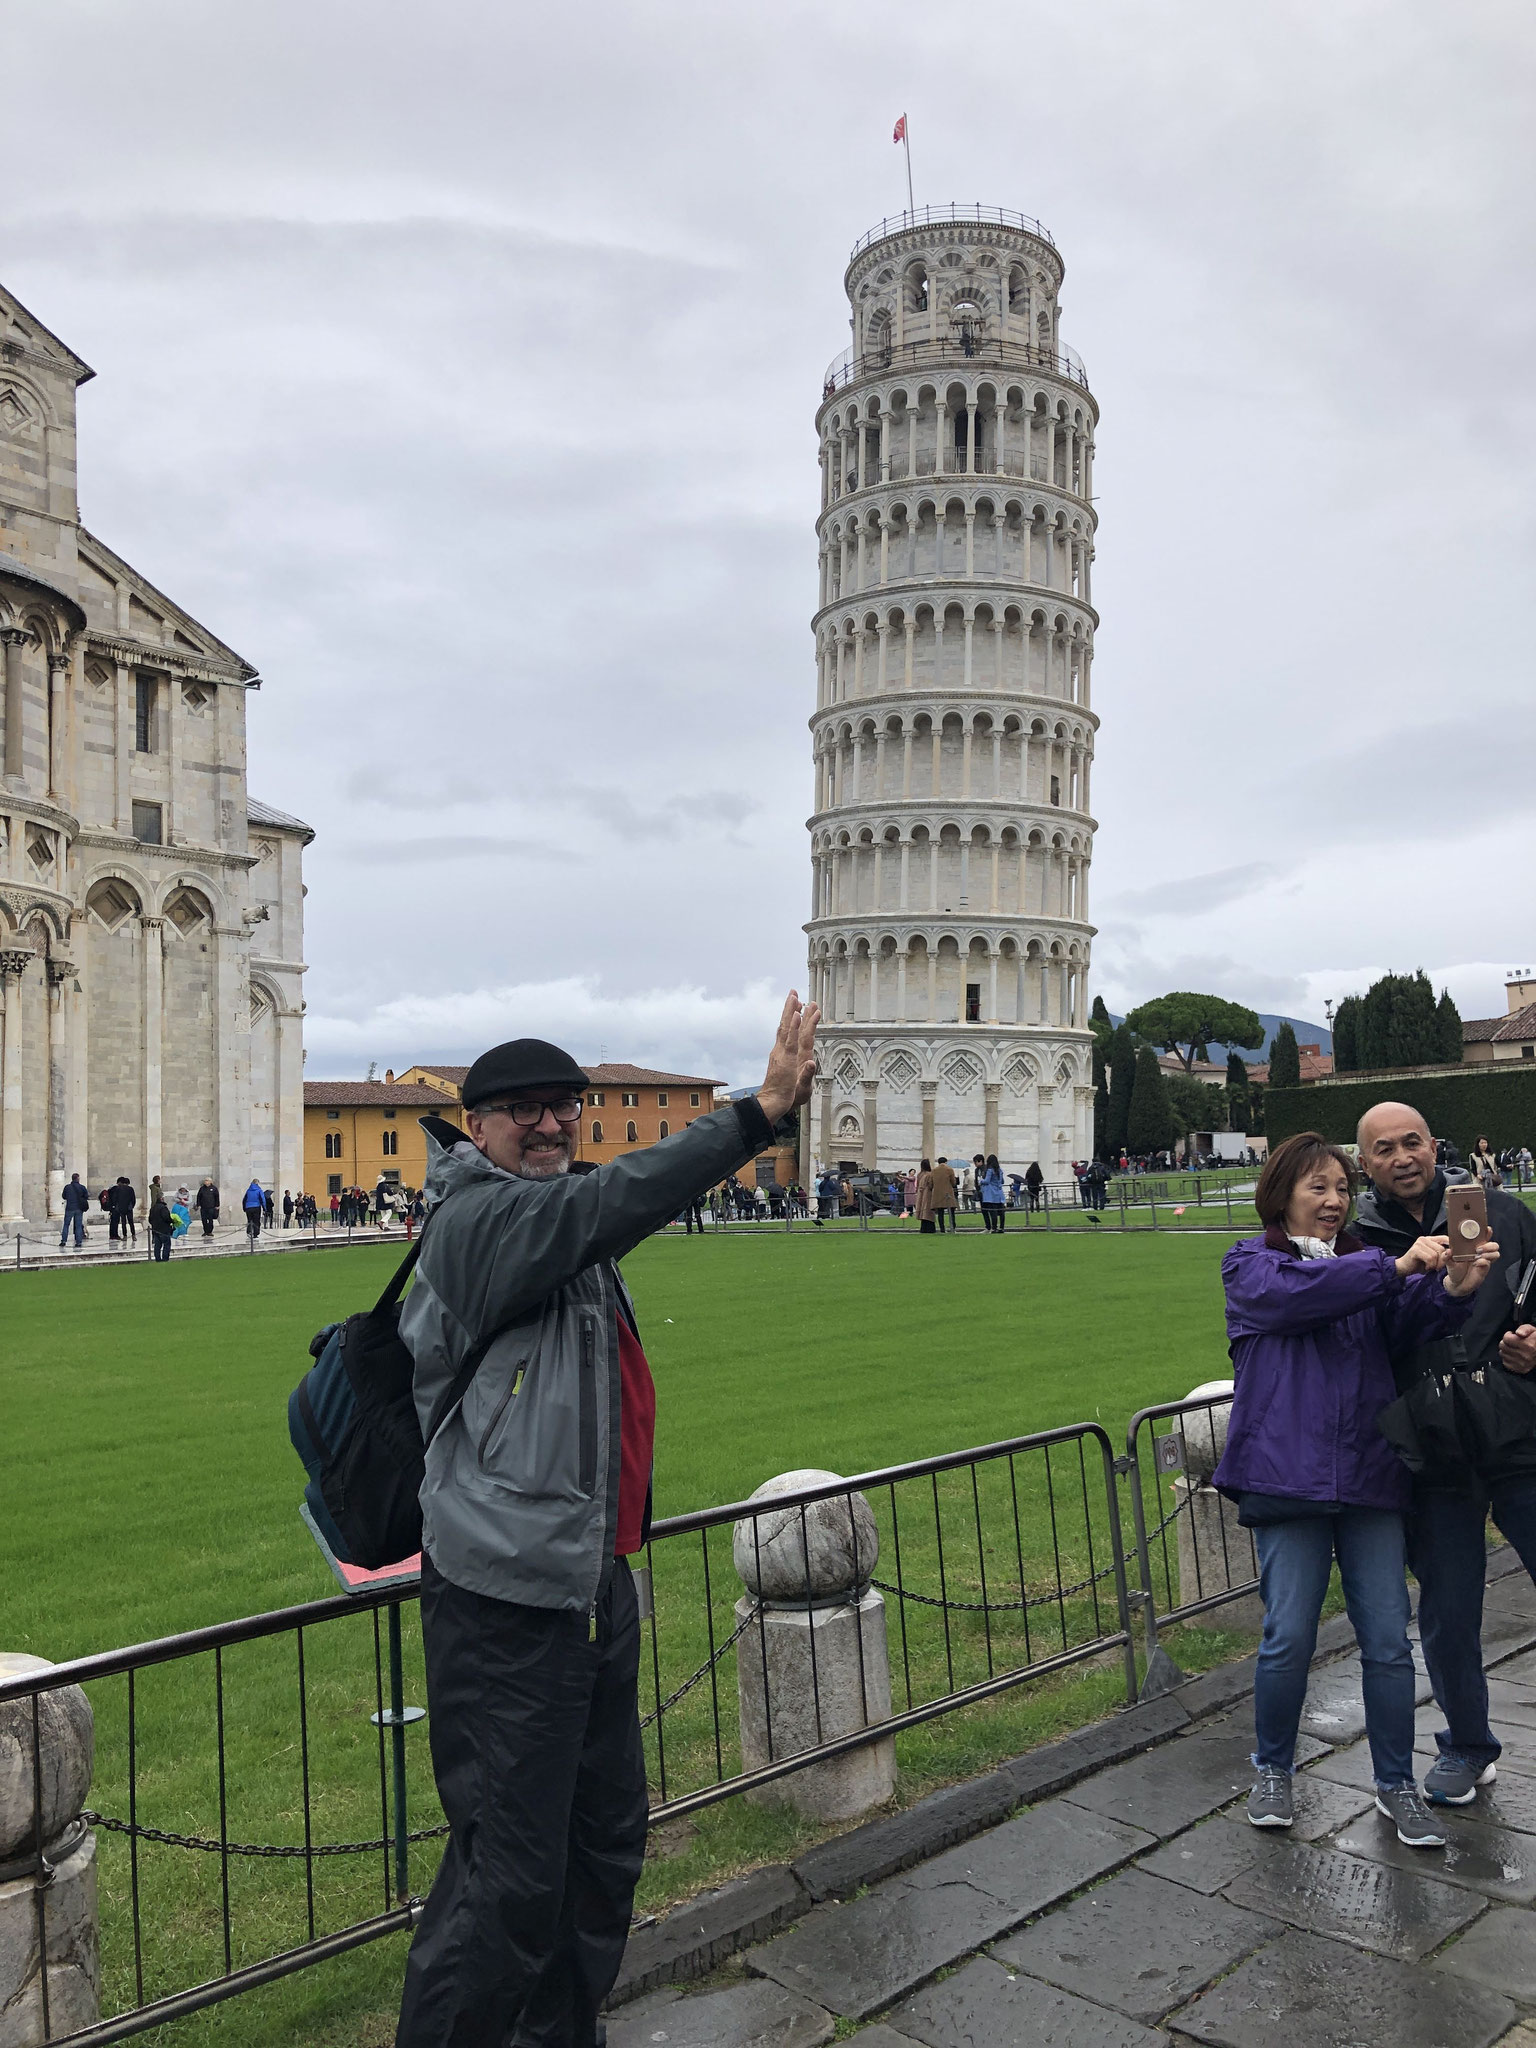 We stopped to try and straighten the Tower.